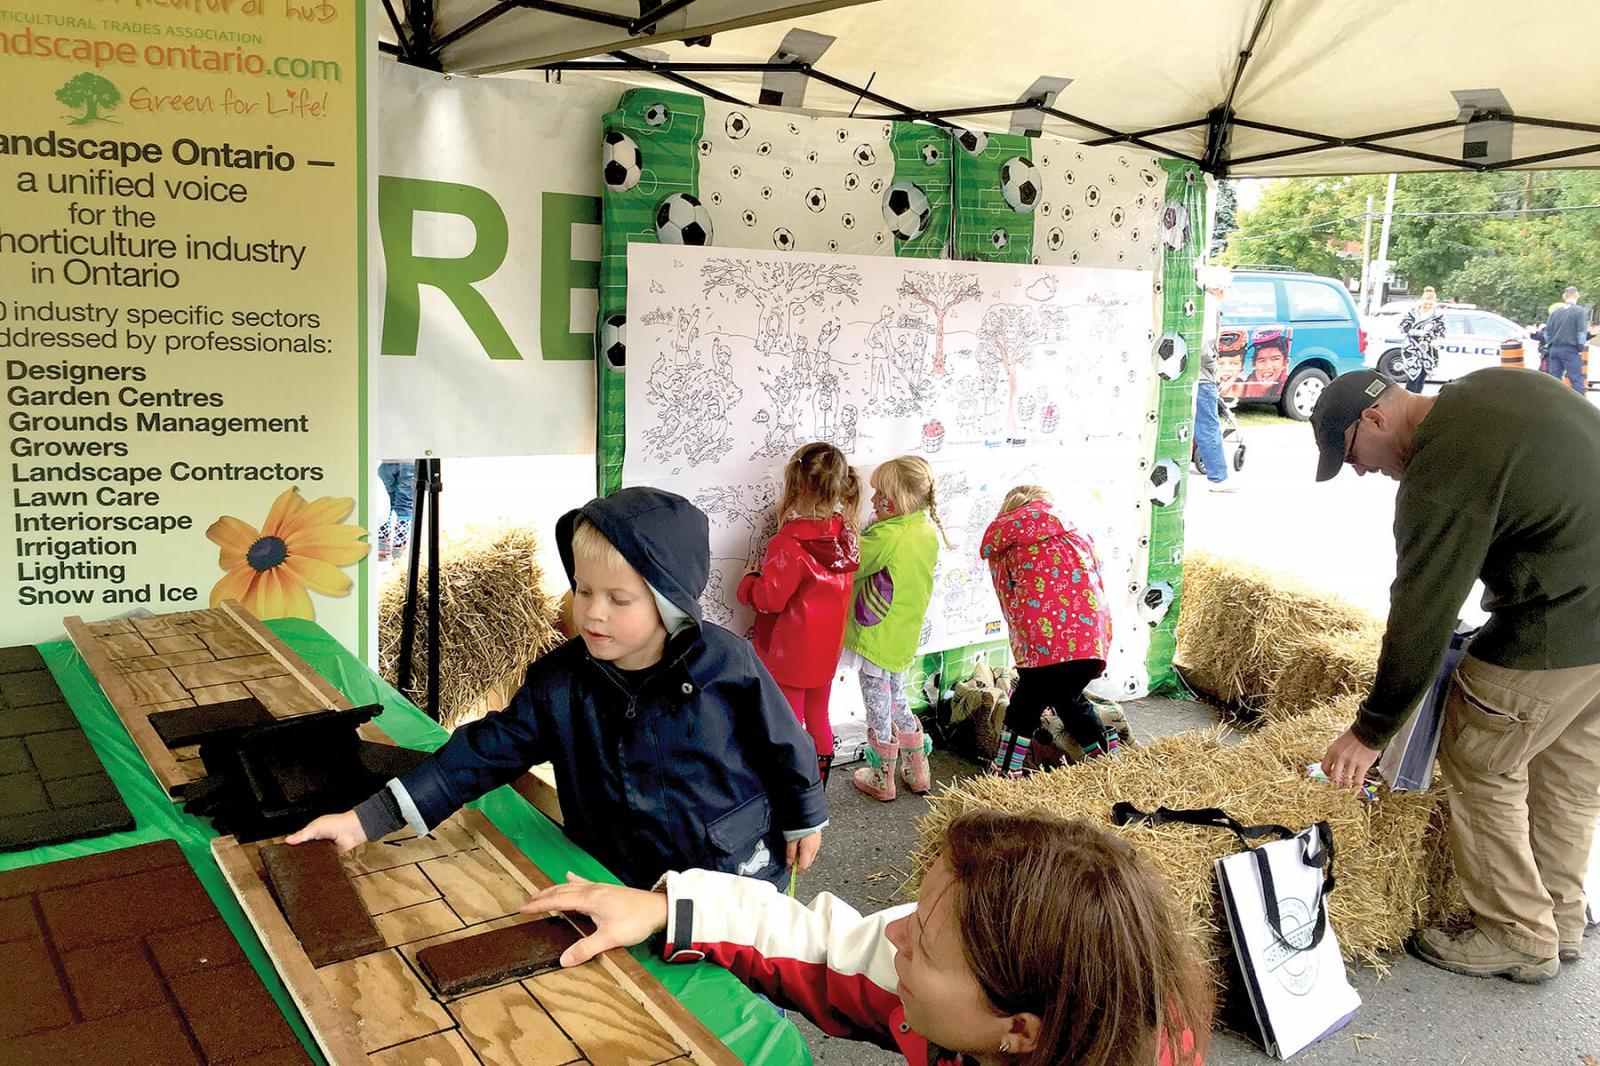 A giant colouring board and wood carvings attracted a great deal of attention to the Landscape Ontario Durham Chapter display at the Brooklin/Whitby Harvest Festival.